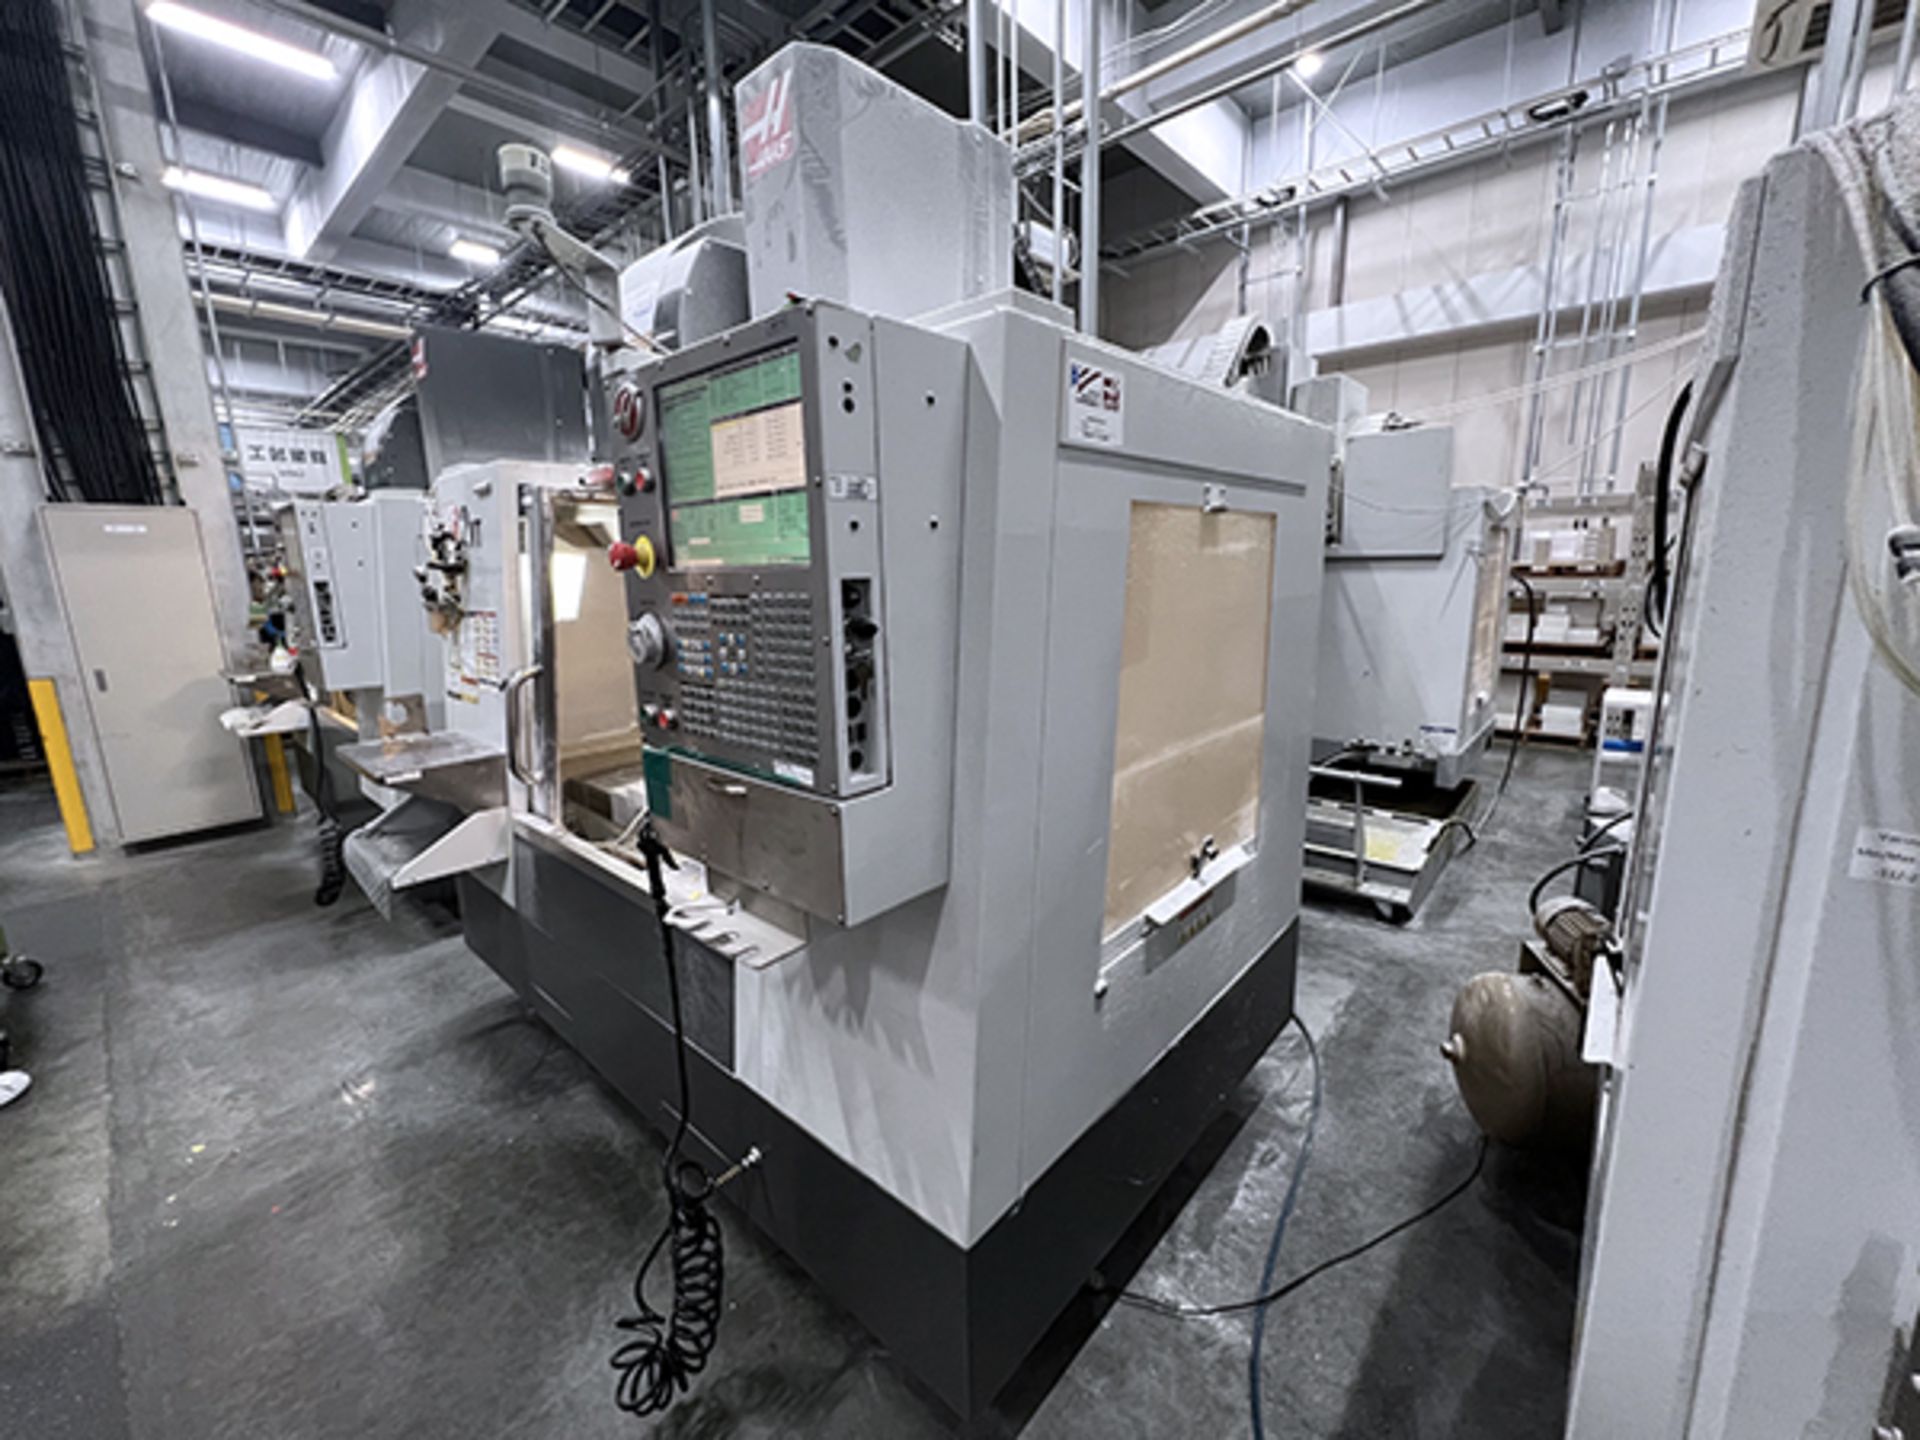 Haas VF-2YT Vertical Machining Center (2011) - Image 5 of 11